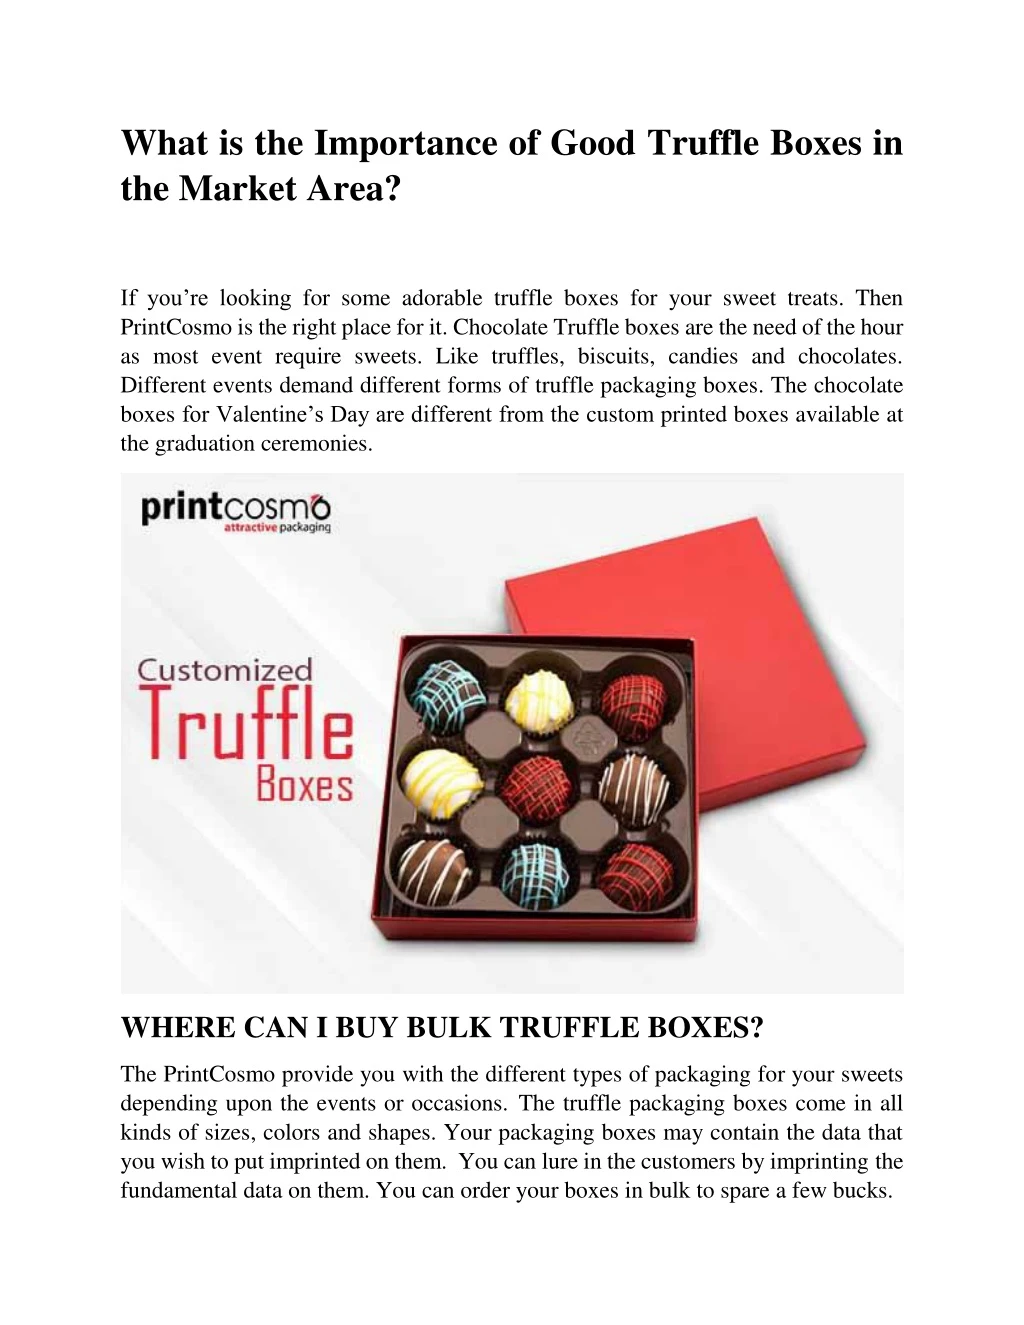 what is the importance of good truffle boxes